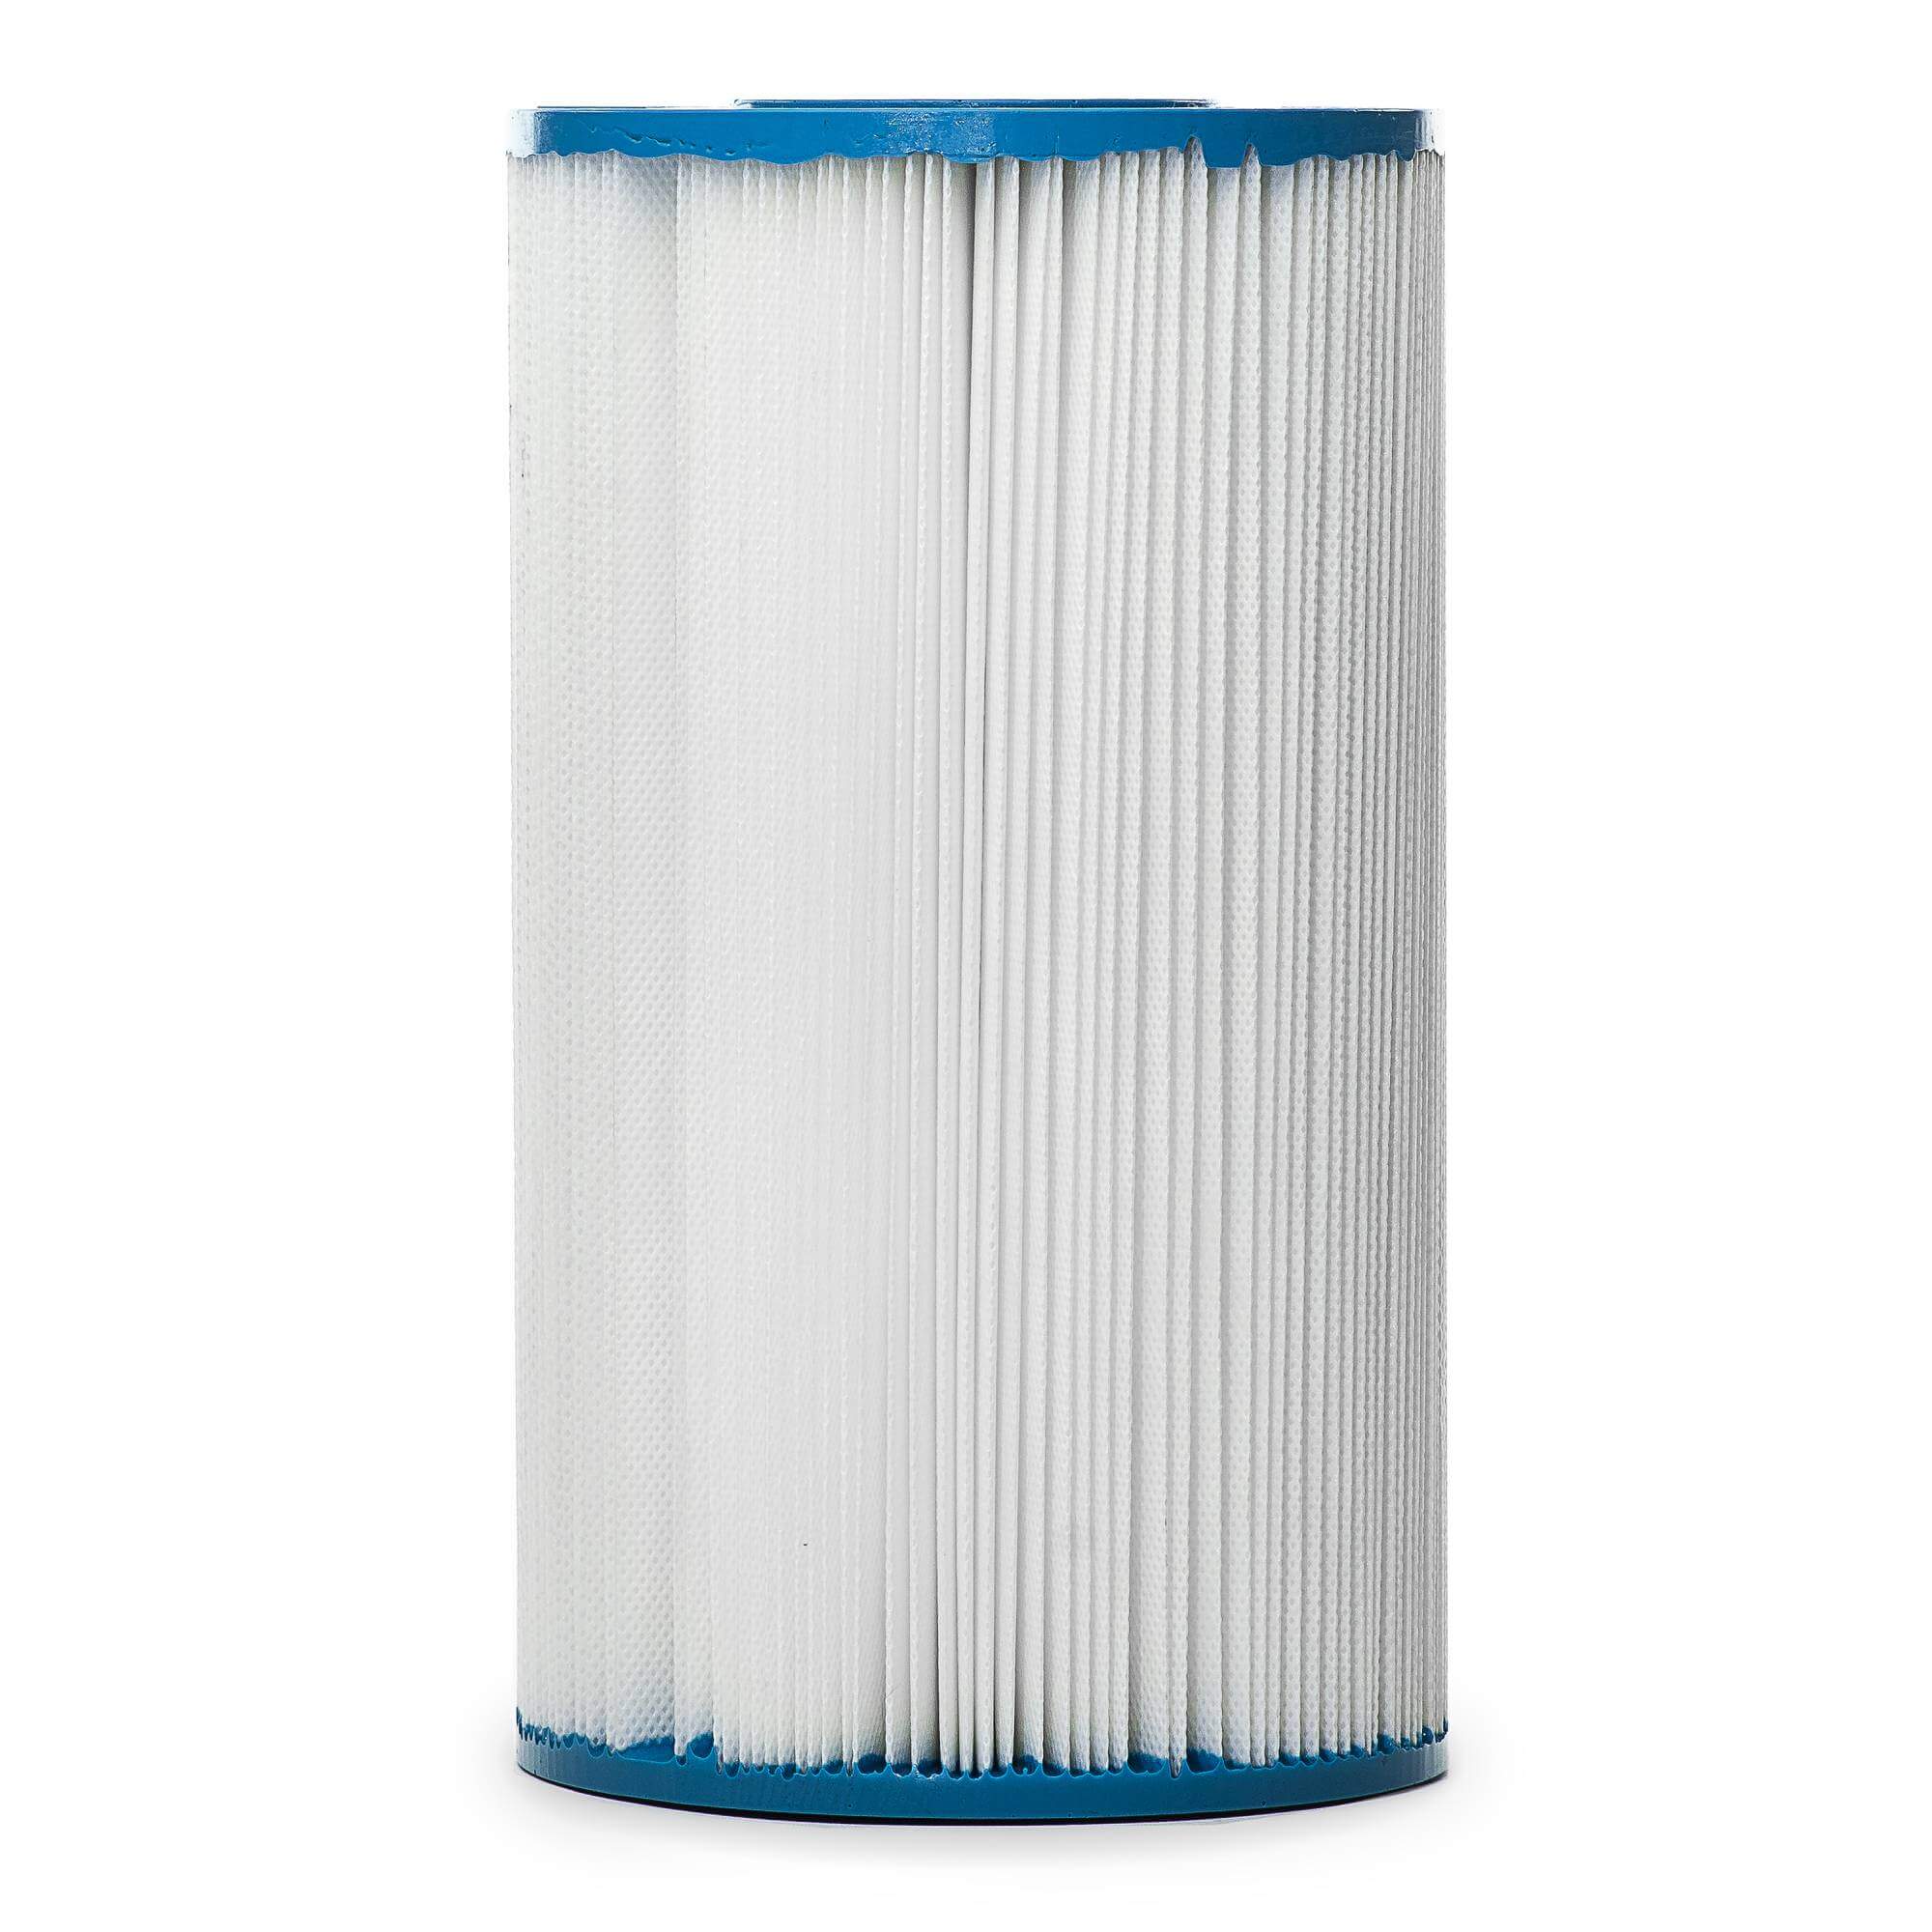 Filters Fast&reg; FF-0141 Replacement Pool & Spa Filter Cartridge